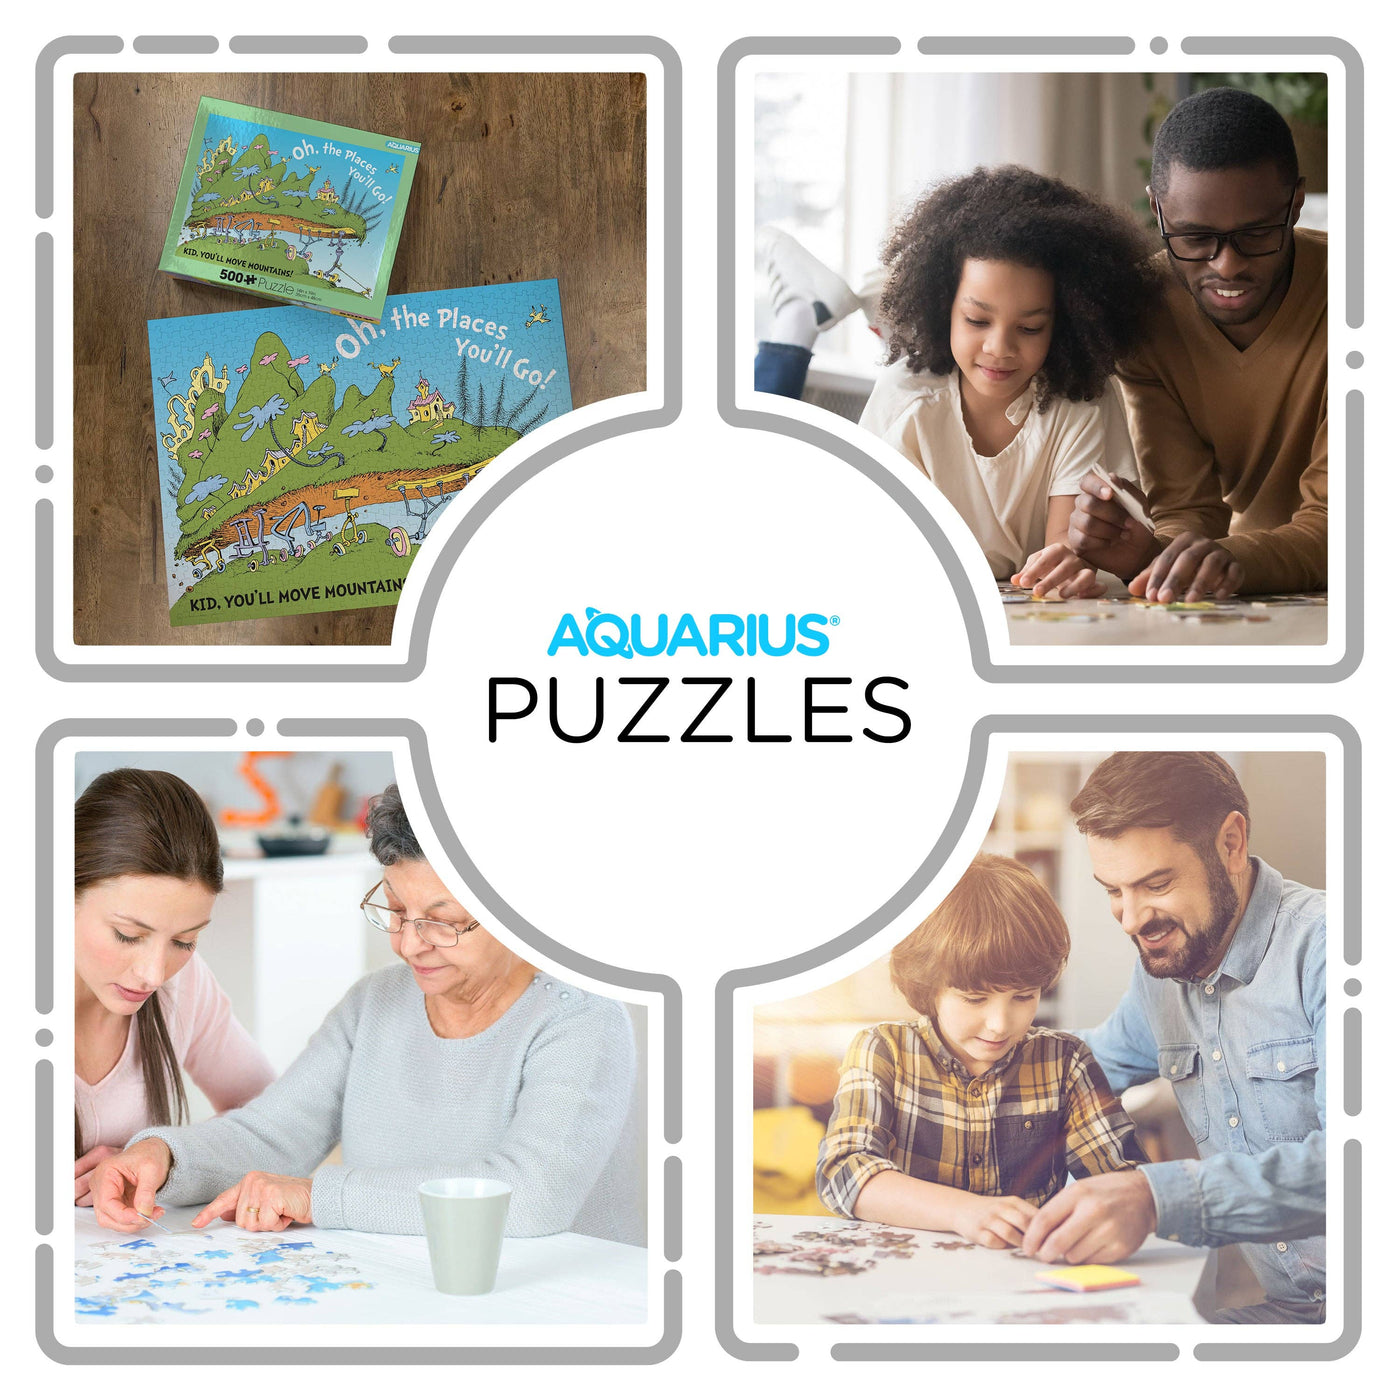 Oh, The Places You'll Go! 500 Piece Jigsaw Puzzle